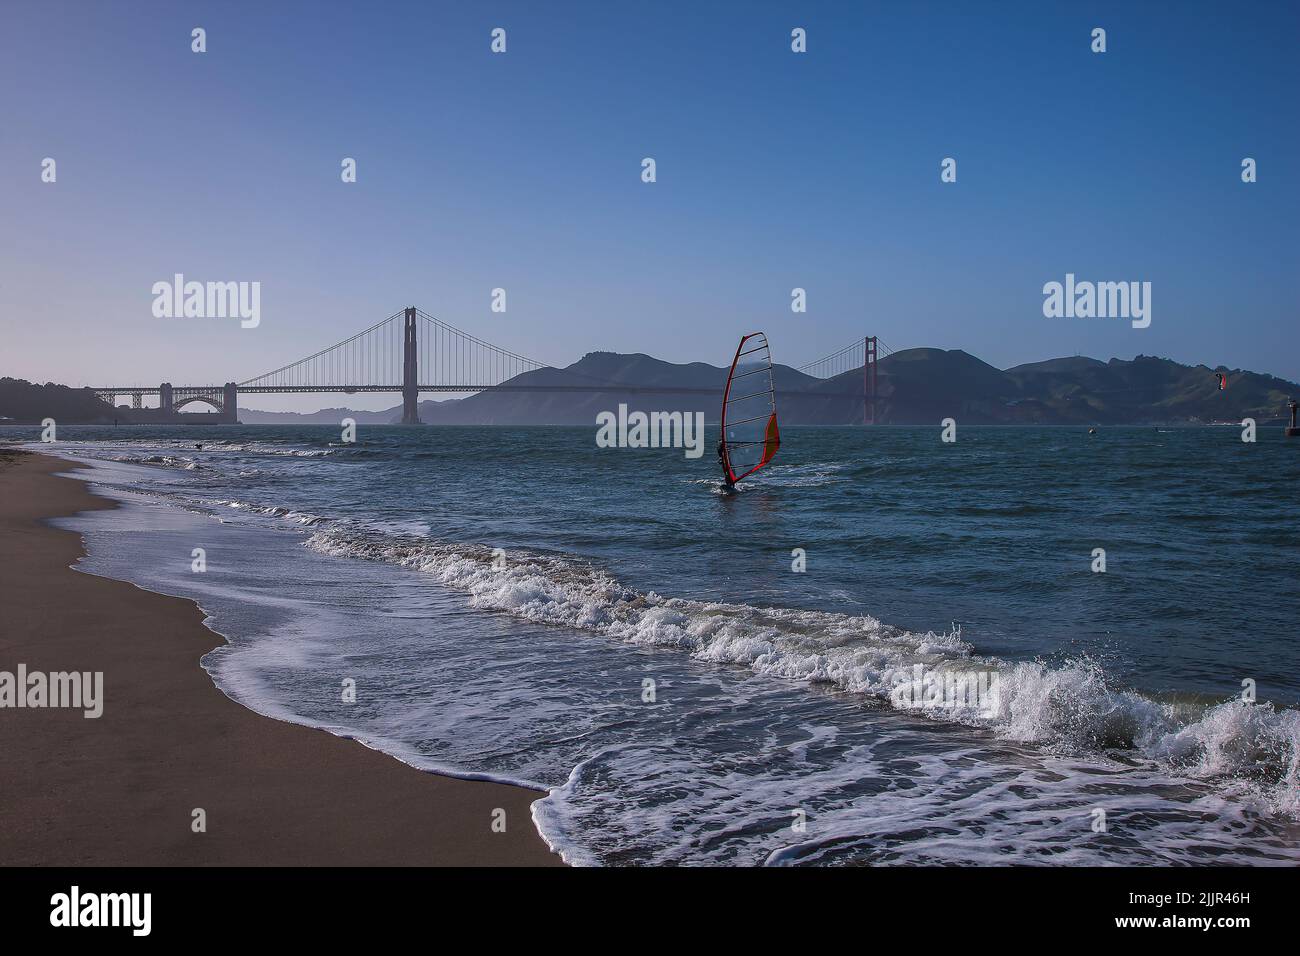 Windsurfer closing in on the beach in front of Golden Gate Bridge, Kite surfer in the distance, San Francisco, California, United States of America Stock Photo